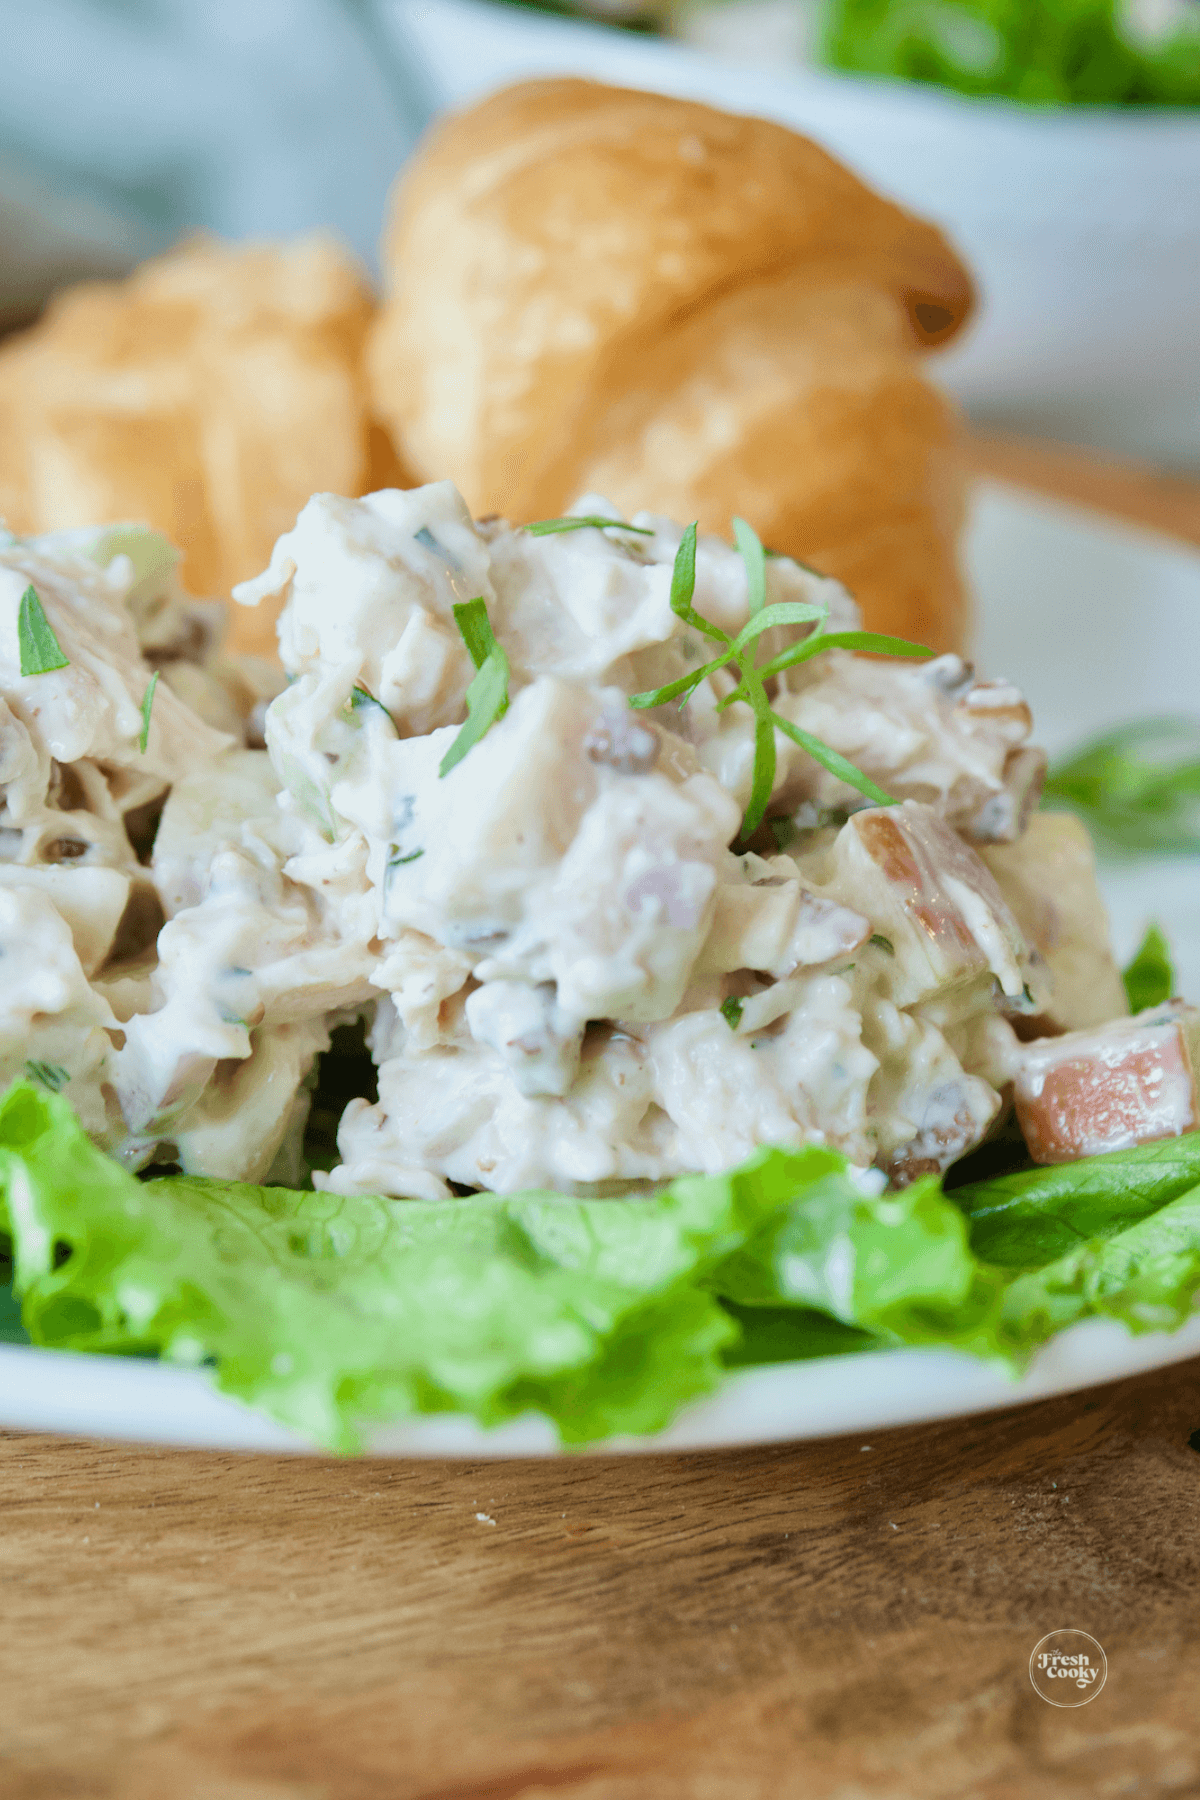 Moist and tender, apple pecan chicken salad on bed of lettuce with croissants.